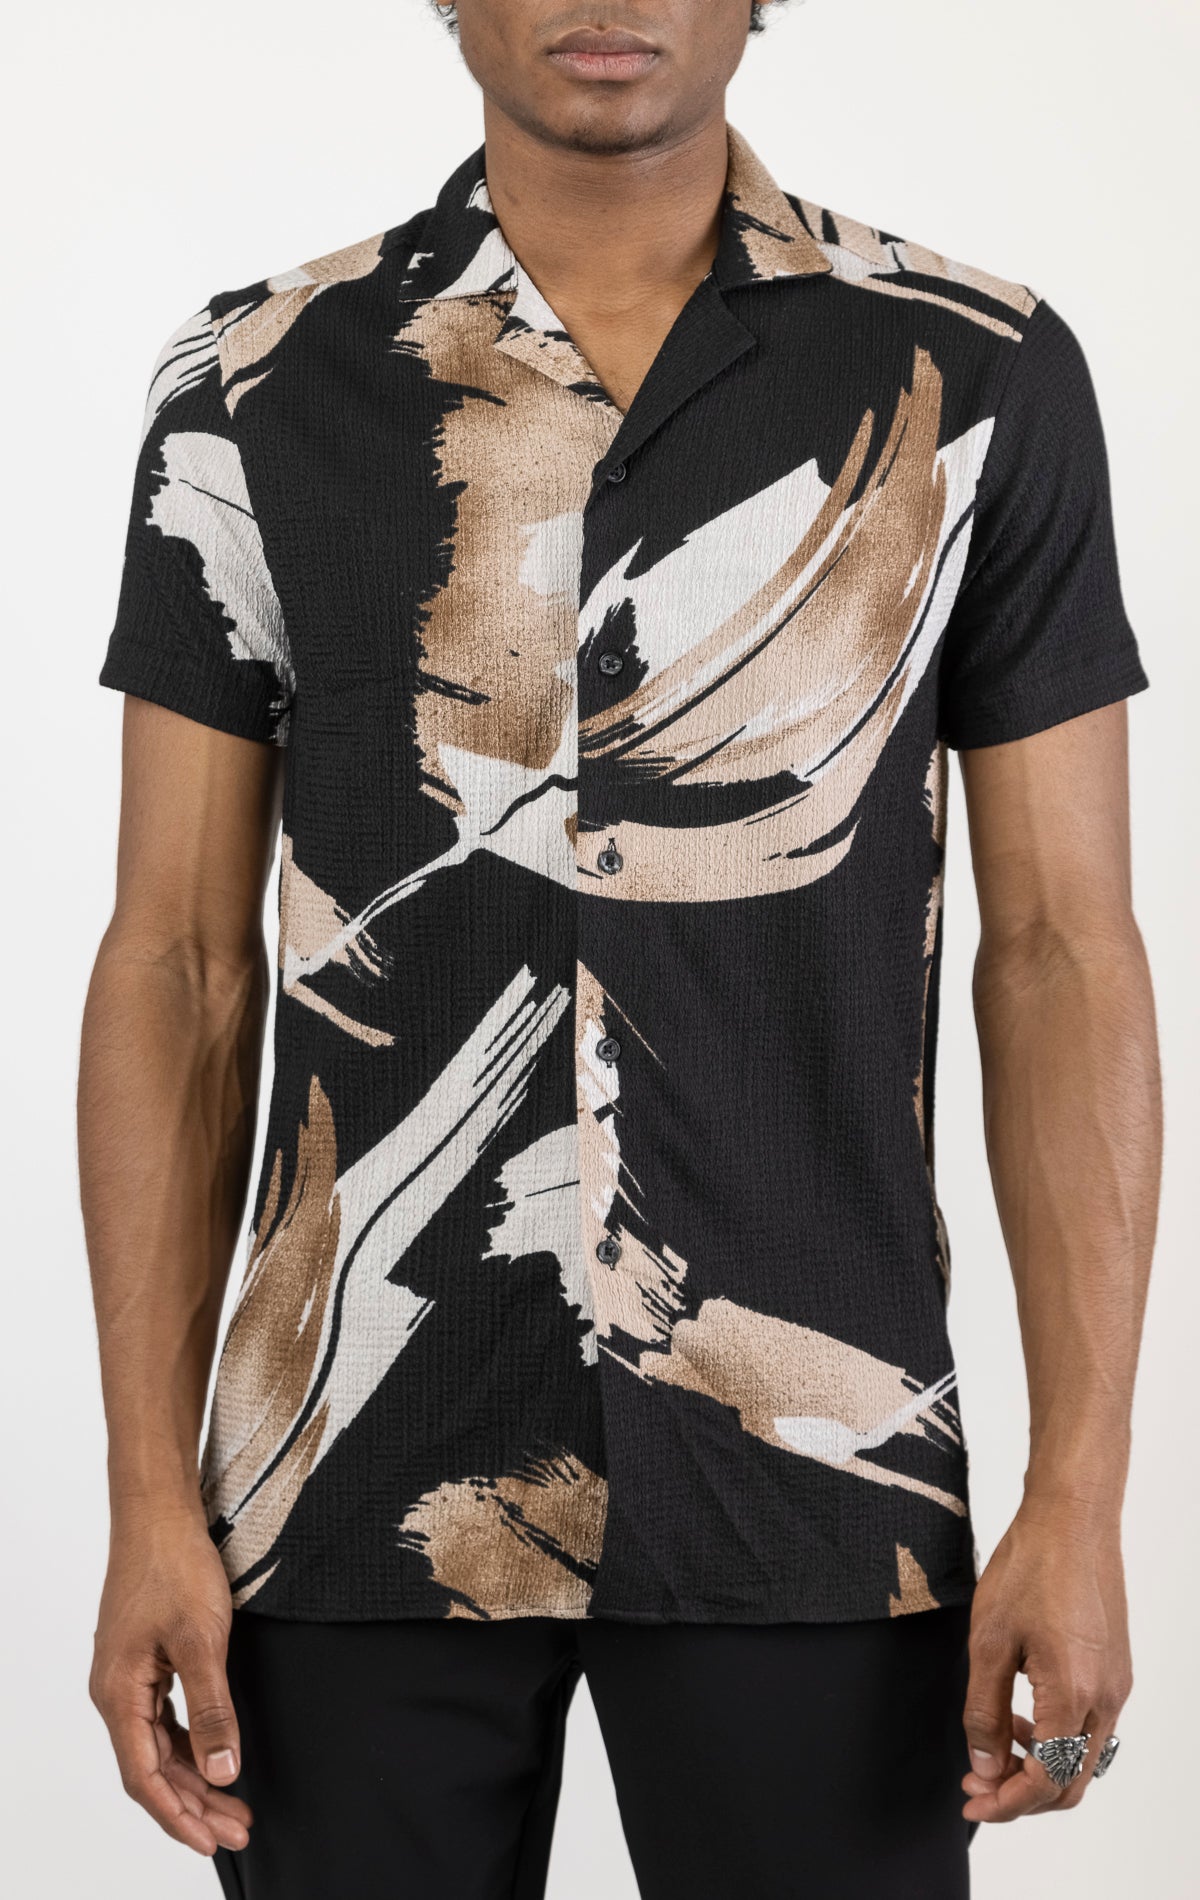 Men's short sleeve geometric pattern shirt in brown. The shirt is made from a lightweight and breathable fabric (99% polyester, 1% elastane) and features a relaxed fit, short sleeves, a classic collar, and a button-up front closure.